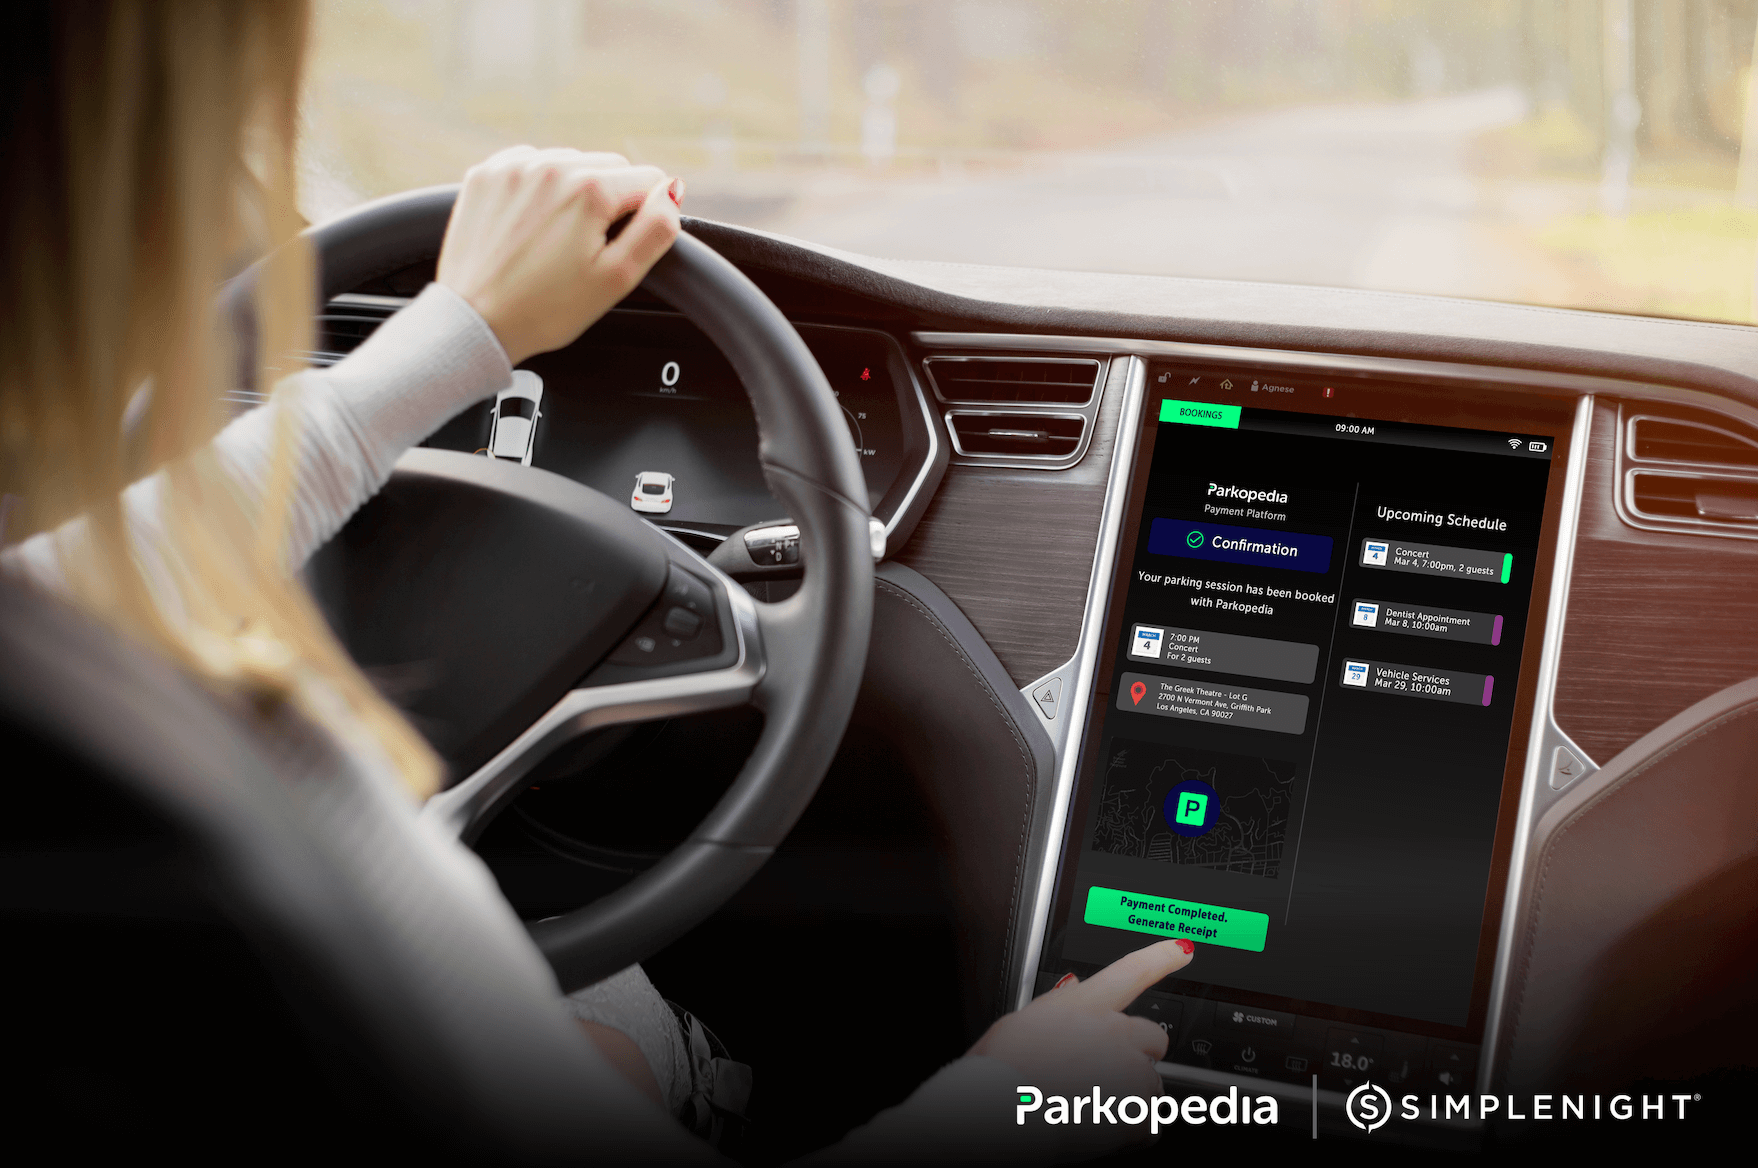 Parkopedia and Simplenight Partner to Enhance In-Car Parking, Charging and Payment Options